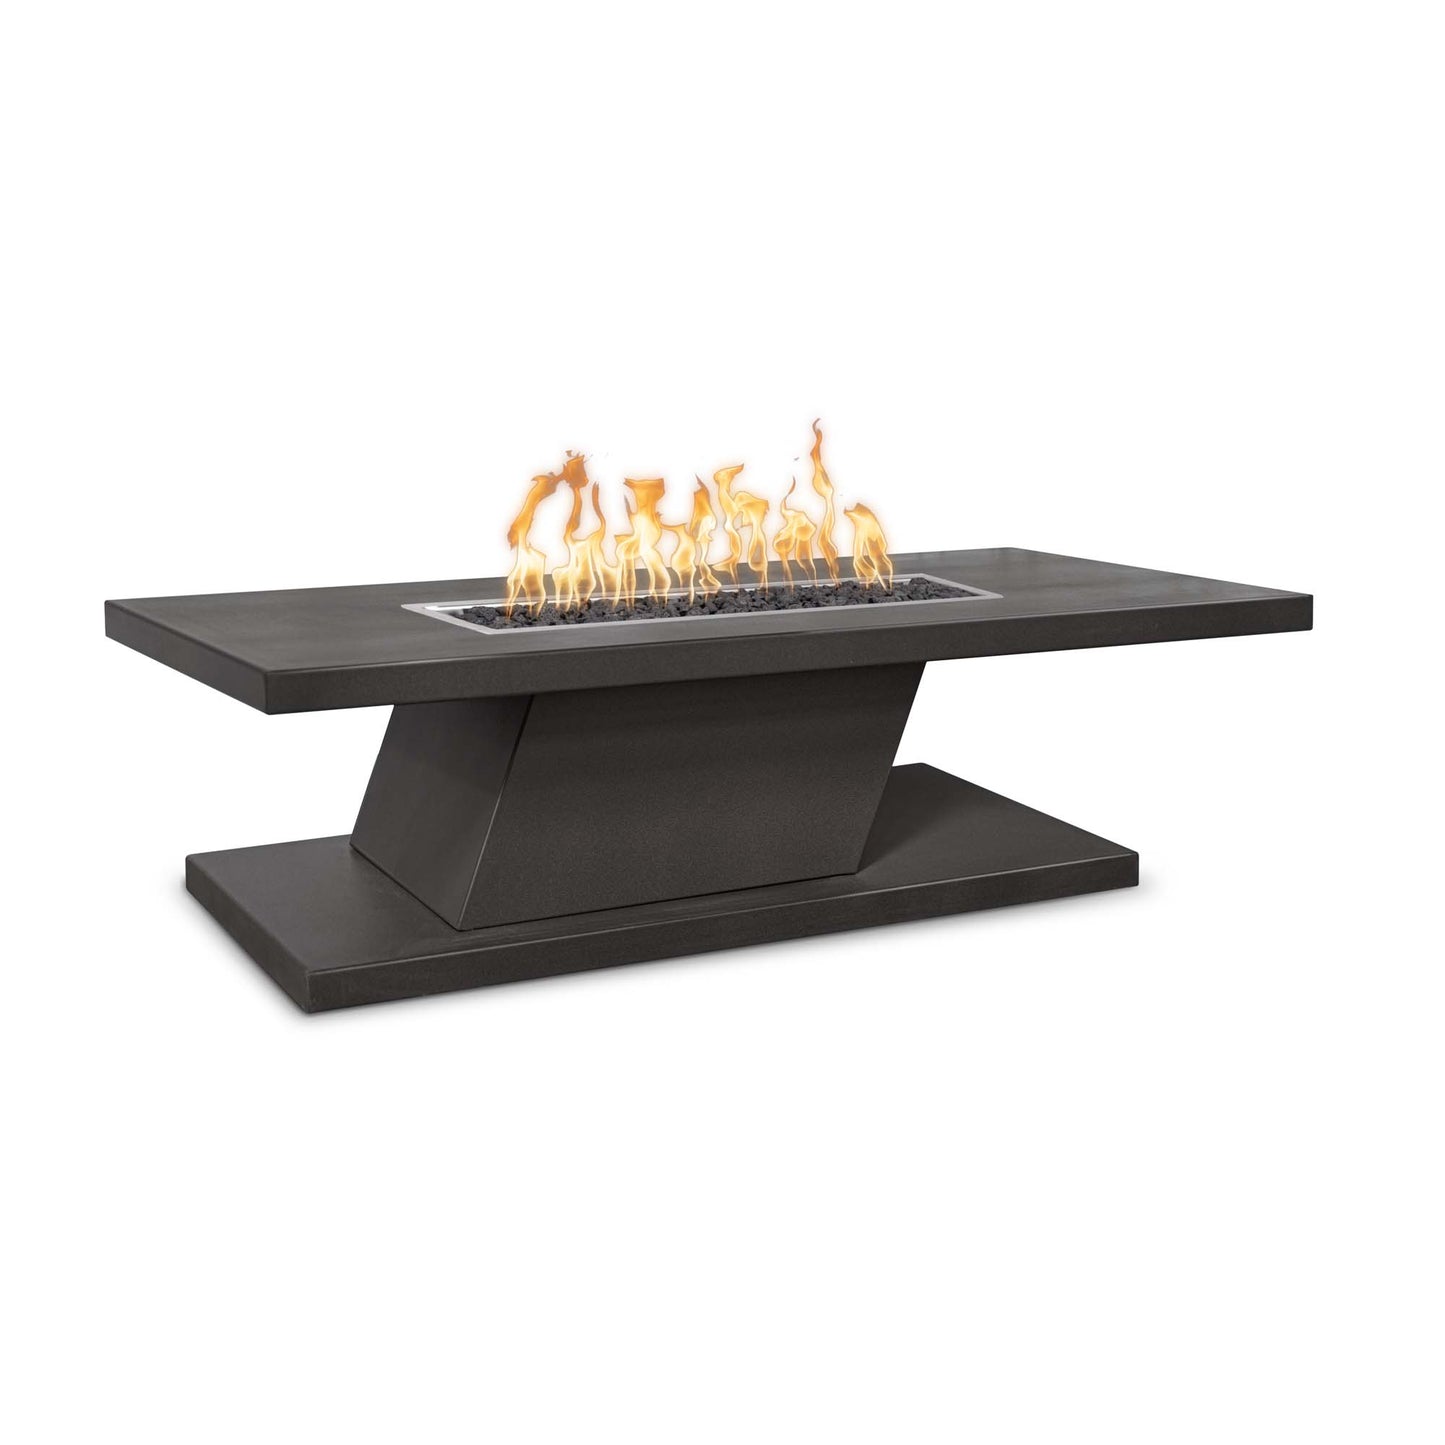 Imperial Fire Pit Table 72" - 15" Tall - Electronic Ignition